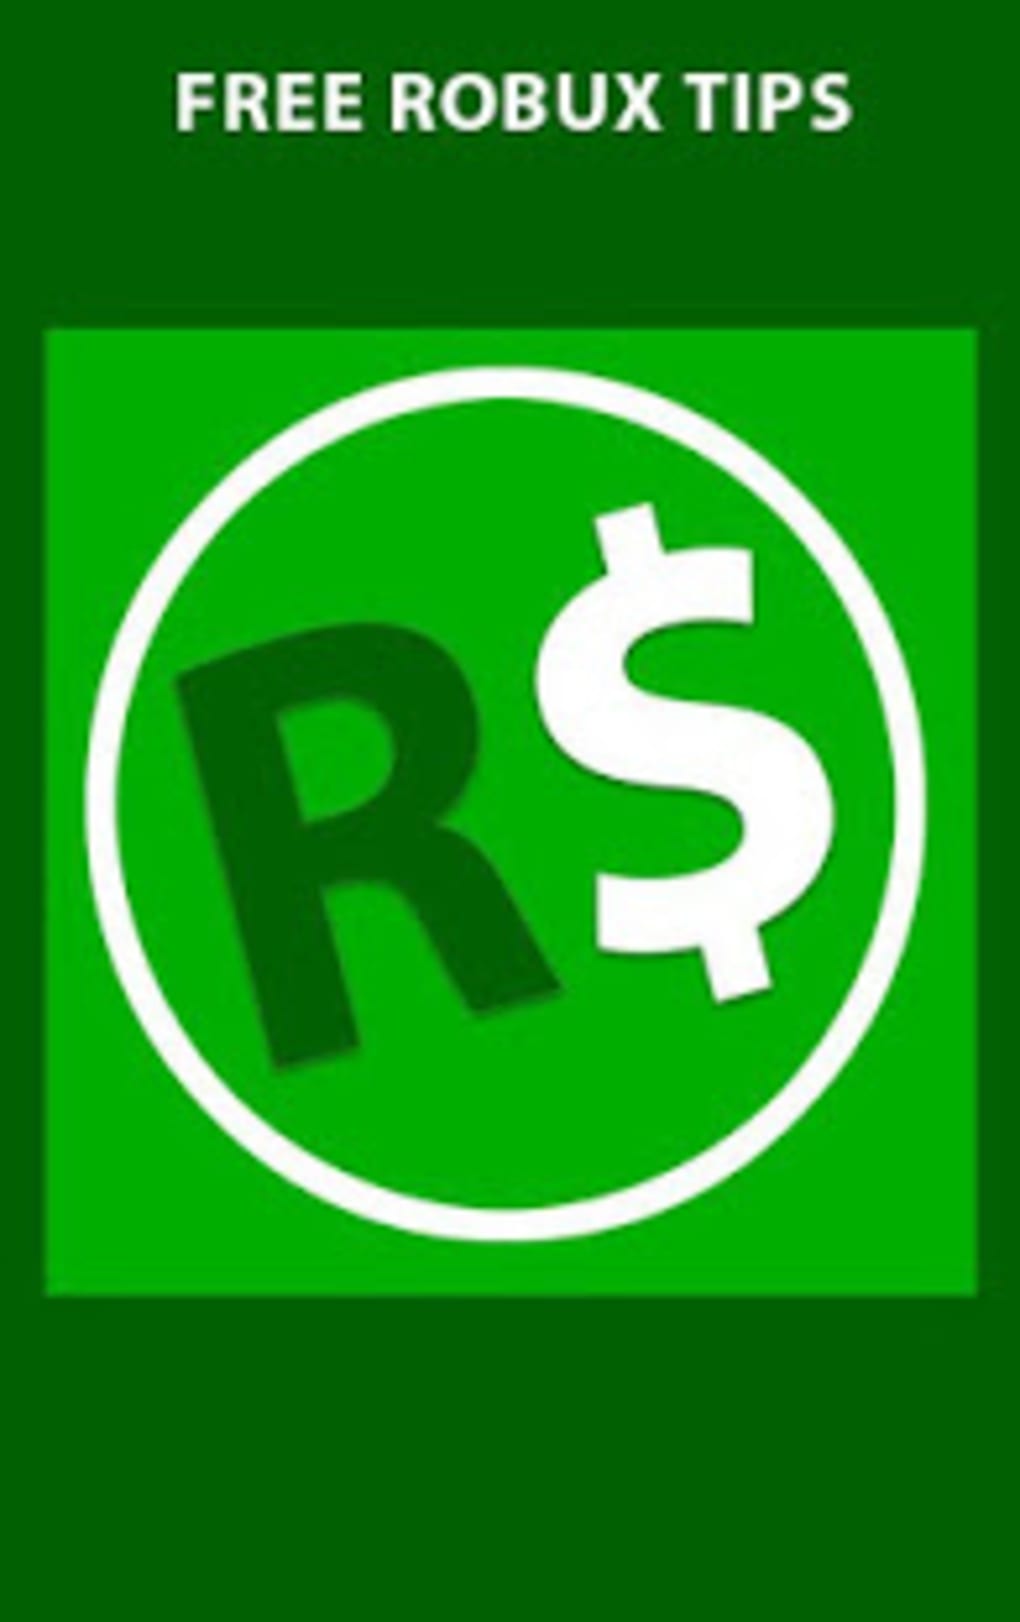 Get Free Robux Pro Tips Guide Robux Free 2019 For Android - 1 million robux screenshot